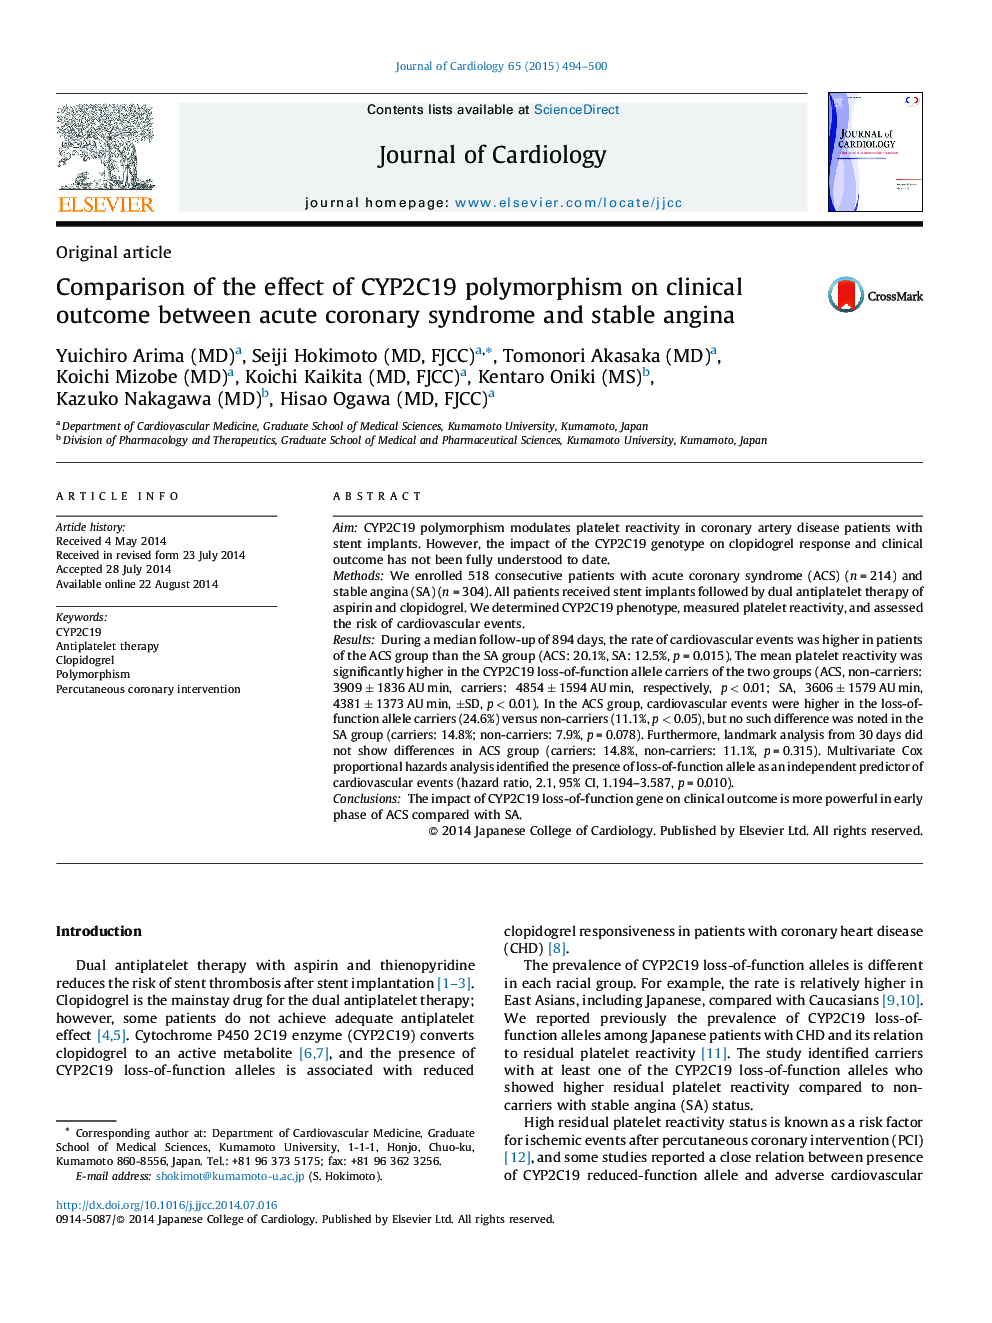 Comparison of the effect of CYP2C19 polymorphism on clinical outcome between acute coronary syndrome and stable angina